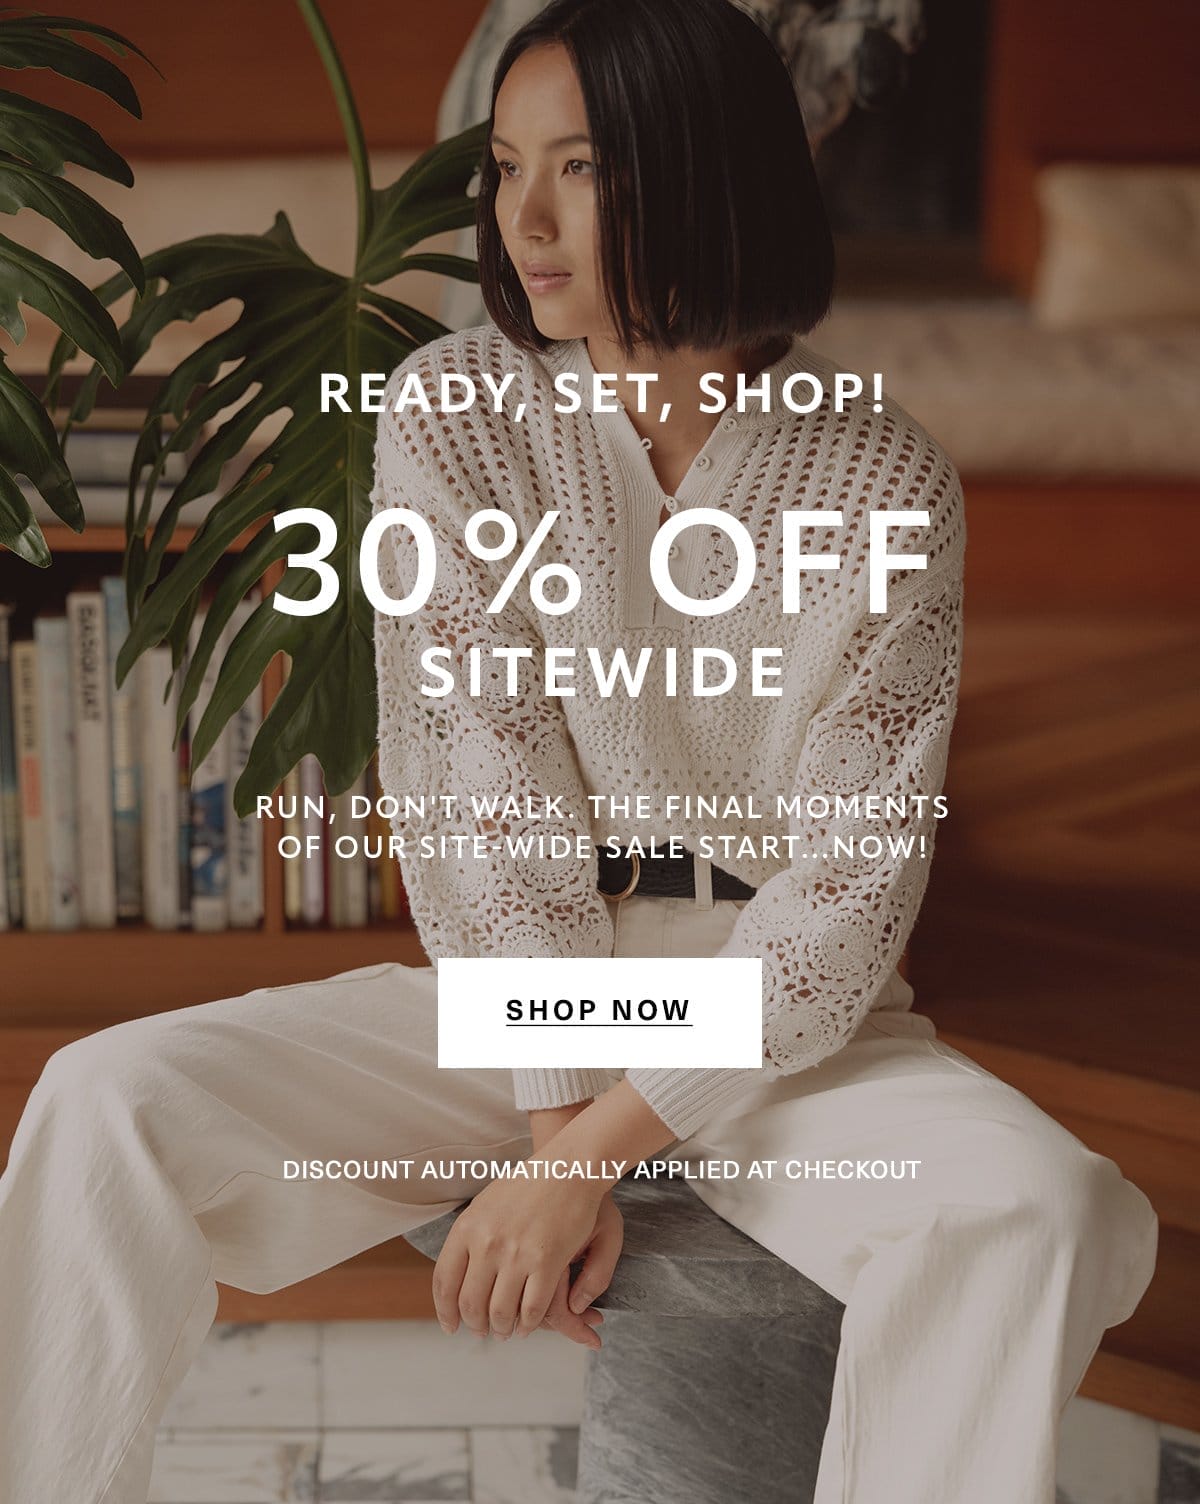 READY, SET, SHOP! 30% OFF SITEWIDE Run, don't walk. The final moments of our site-wide sale start...NOW! Discount automatically applied at checkout. SHOP NOW